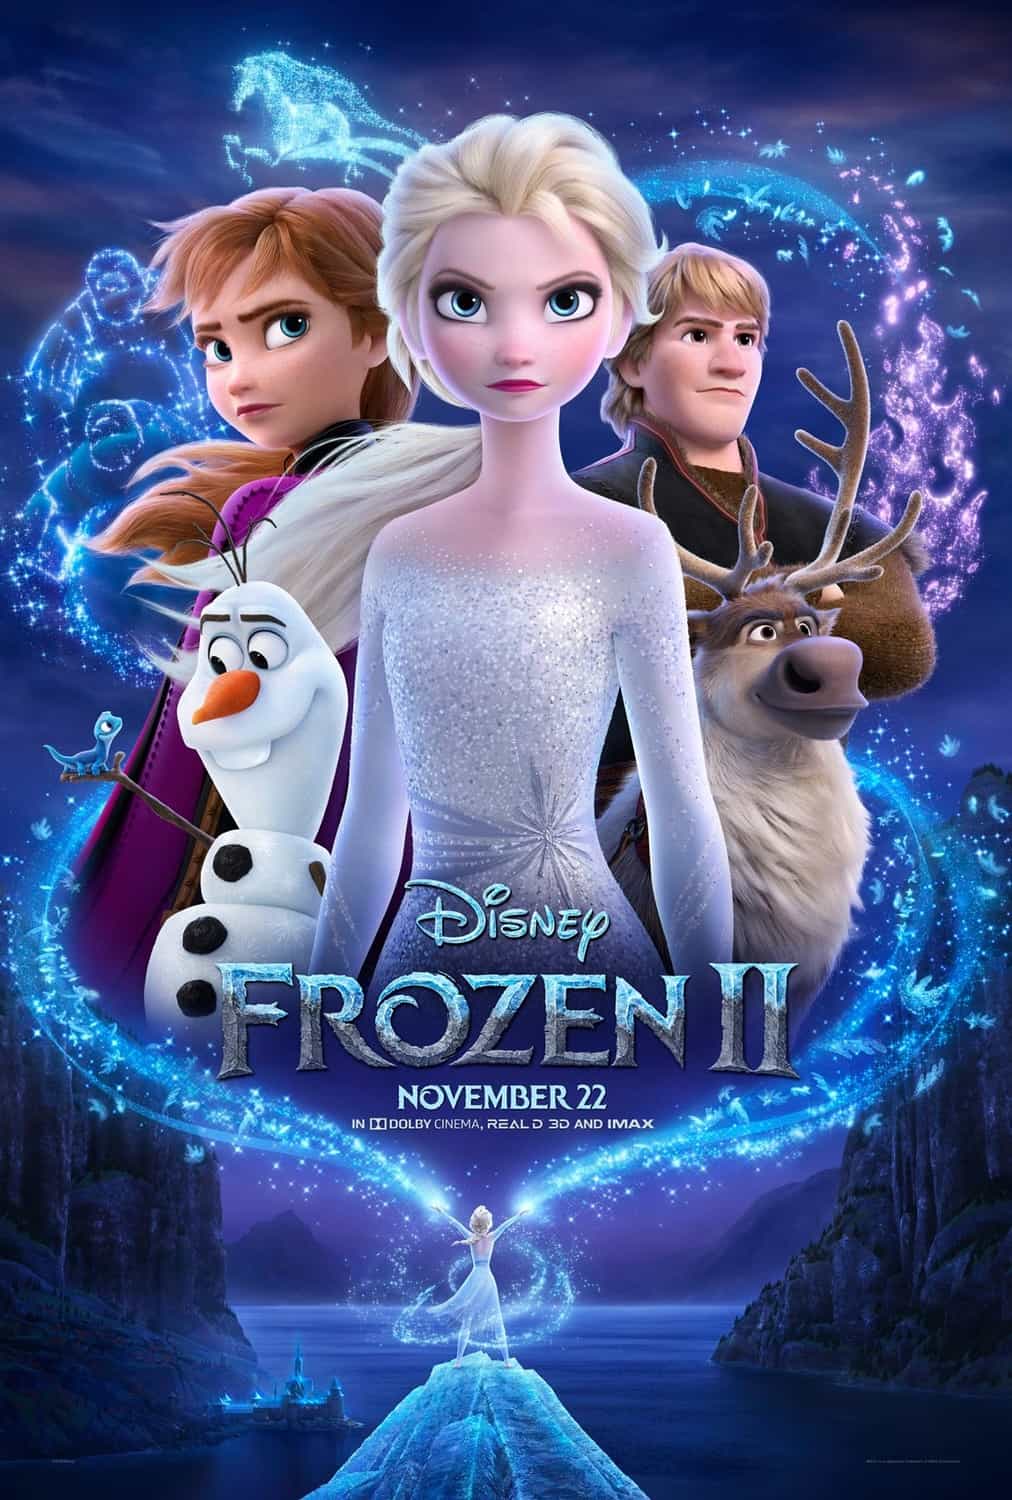 UK Box Office Analysis 29th November - 1st December 2019:  Frozen II remains strong at the top with Knives Out making an impact at number 2